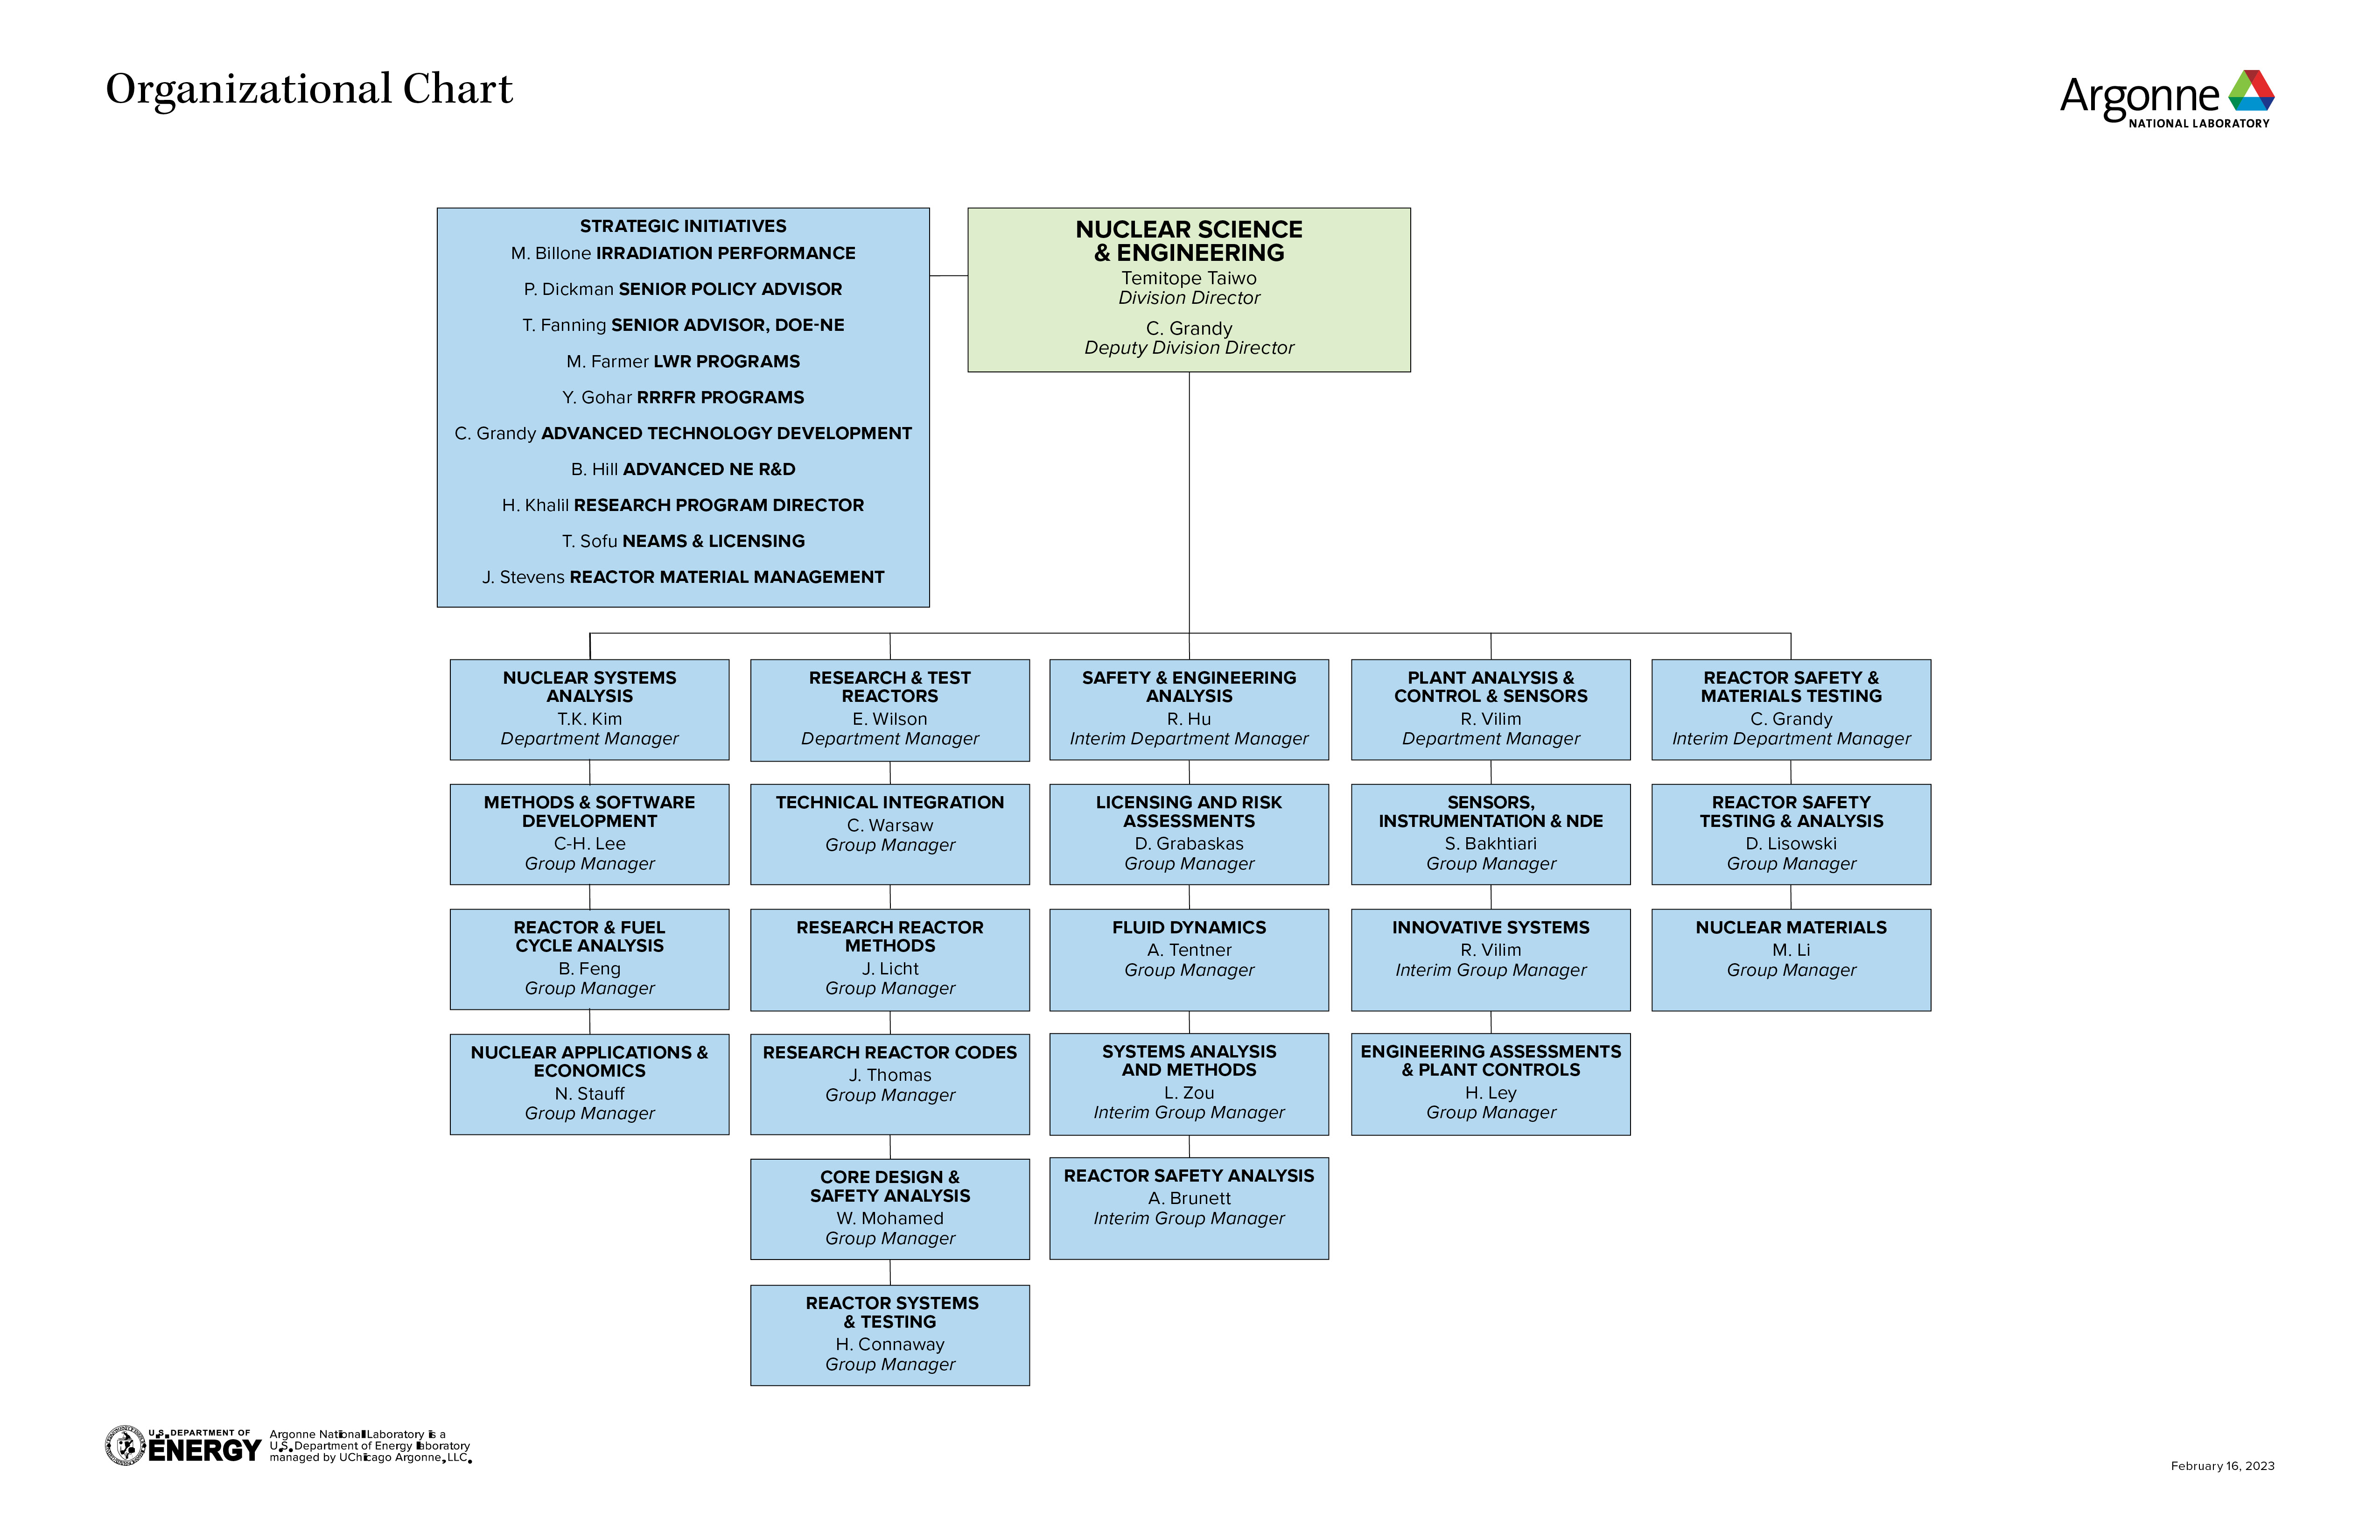 Nuclear Science and Engineering Organizational Chart.